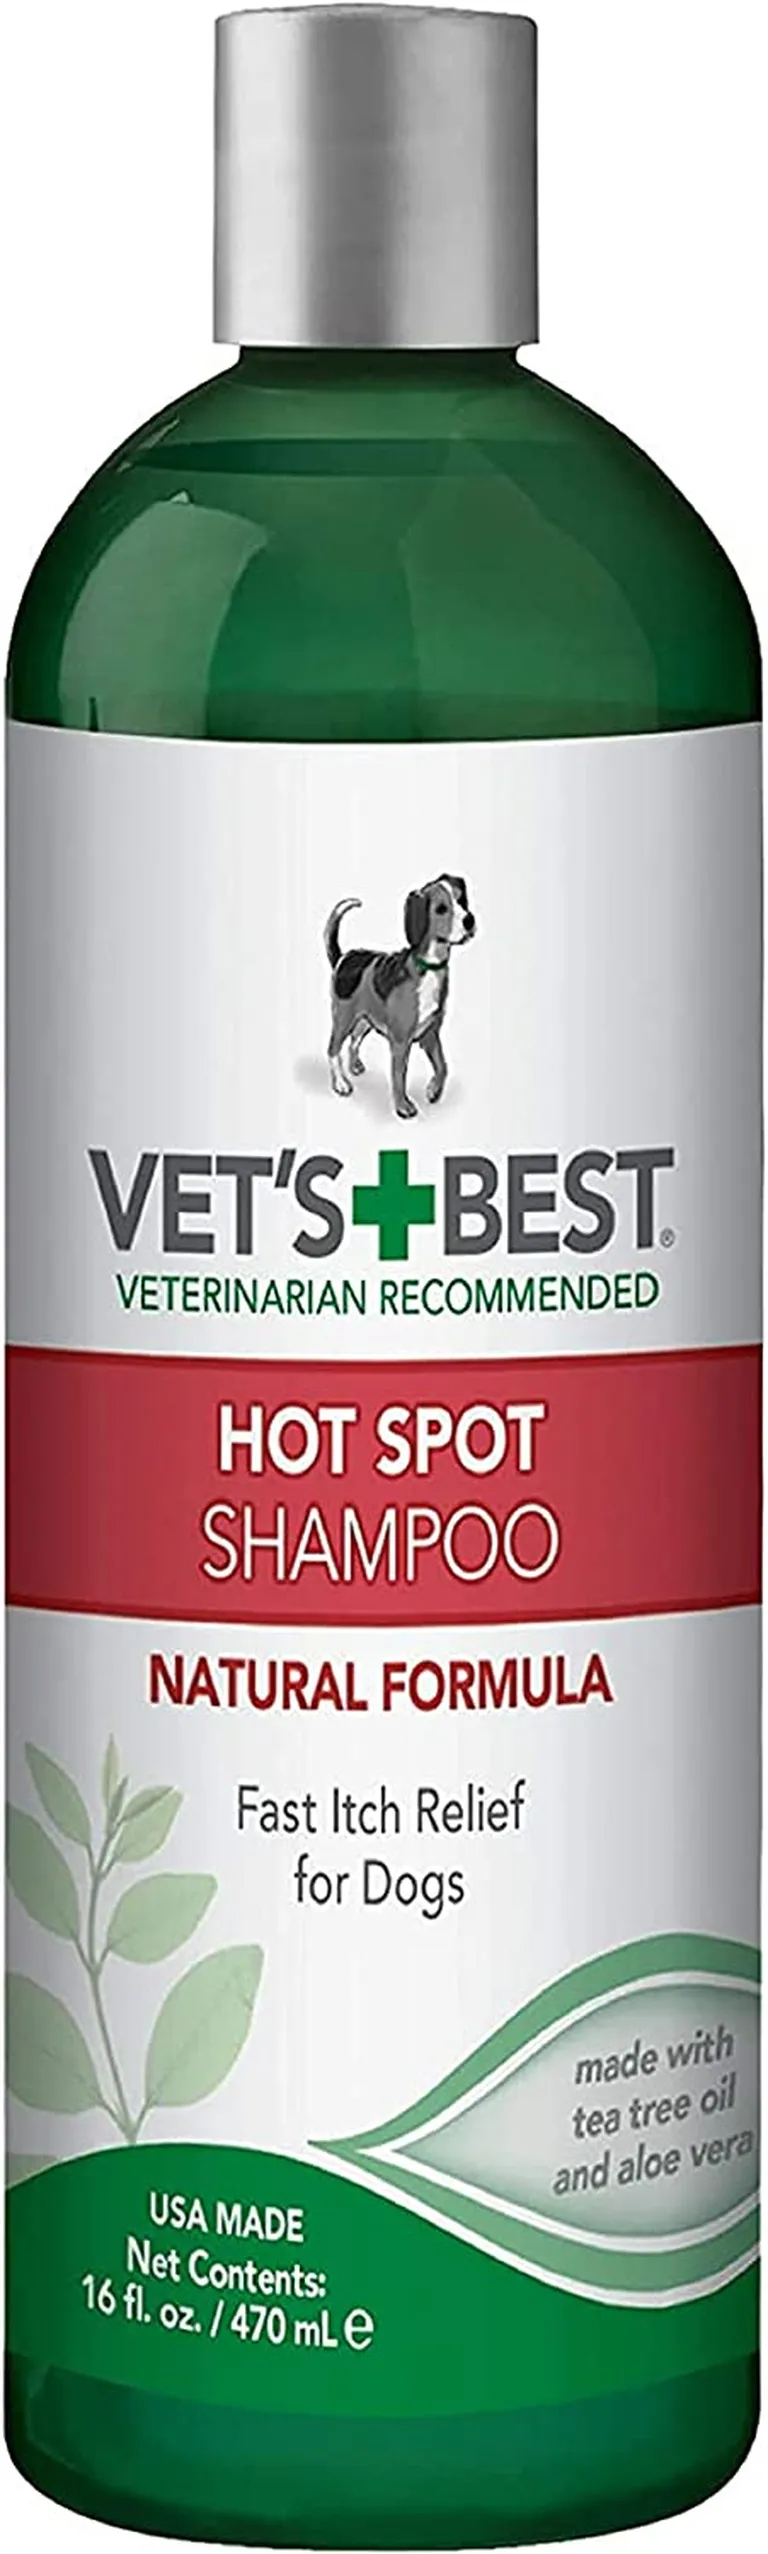 Vets Best Hot Spot Shampoo Tea Tree Oil and Aloe Vera for Itch Relief for Dogs and Pupppies Photo 1